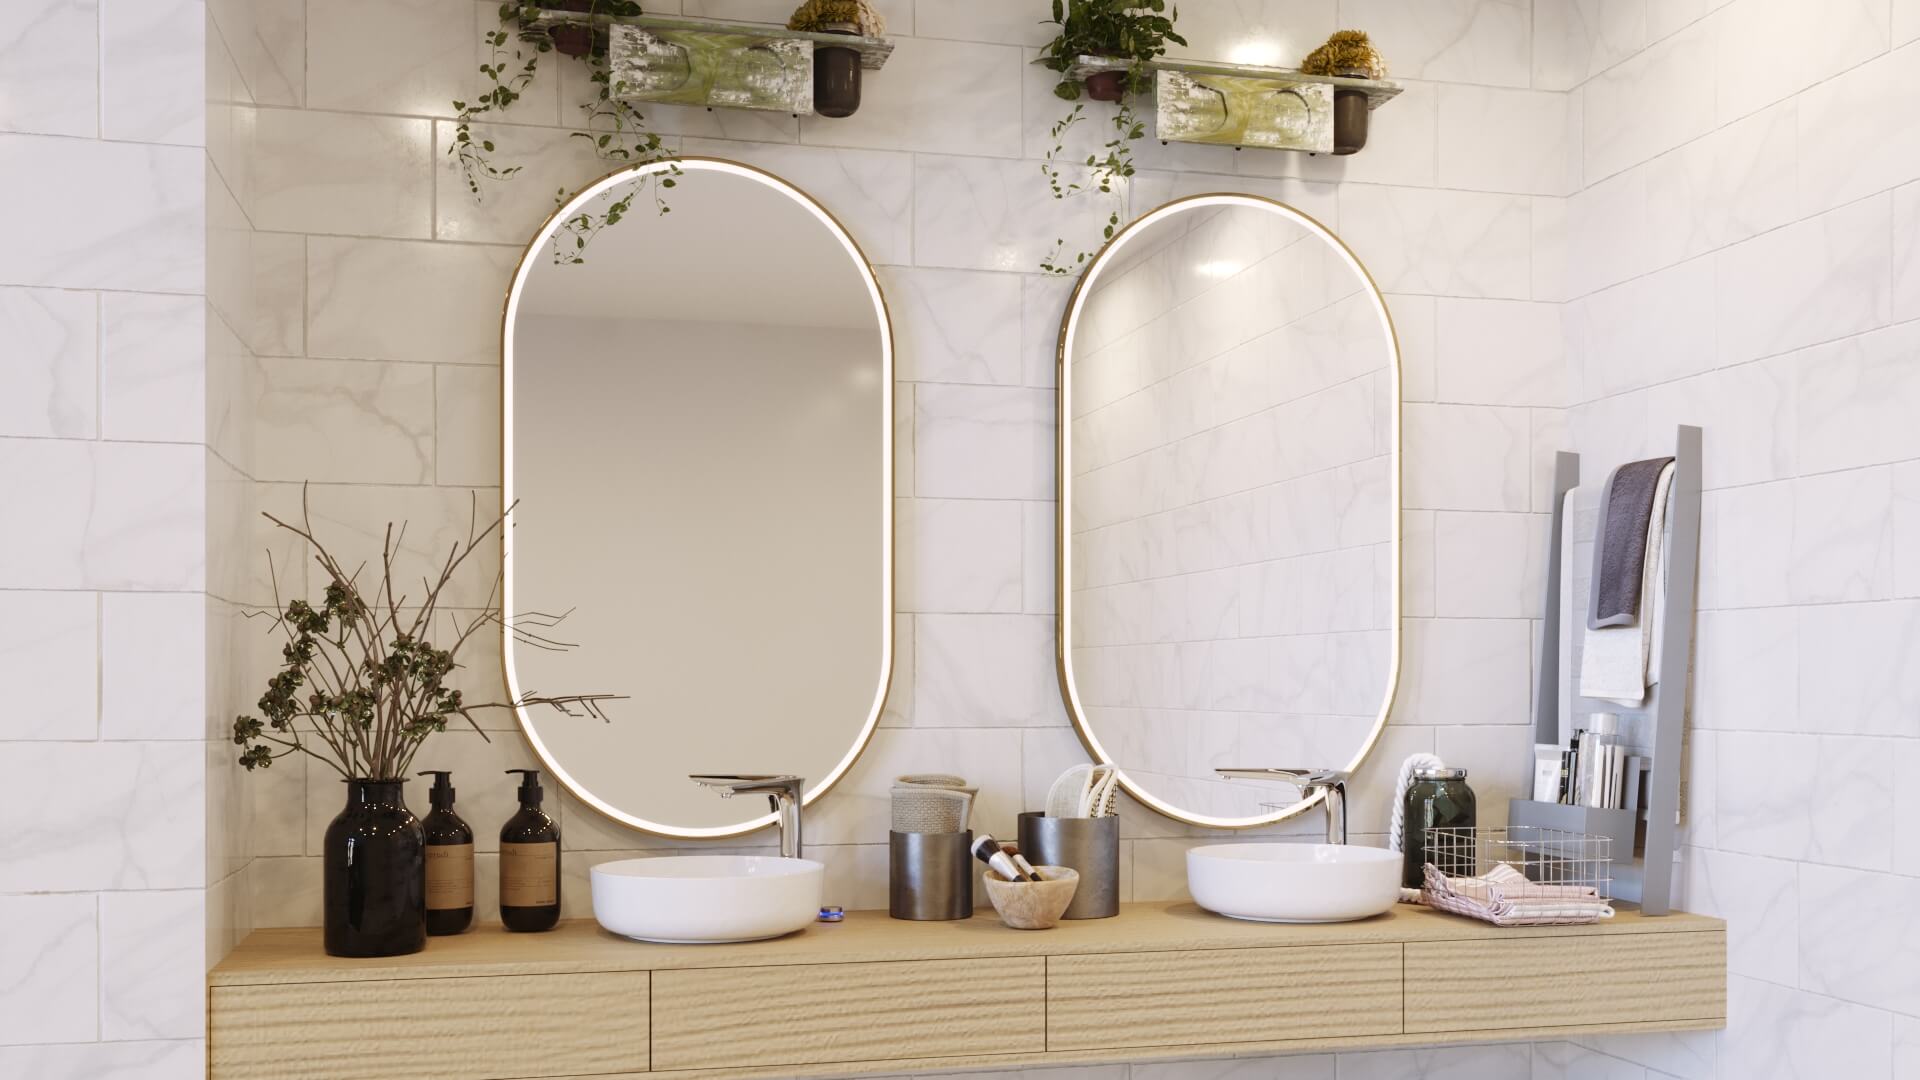 Keep it simple with mirror